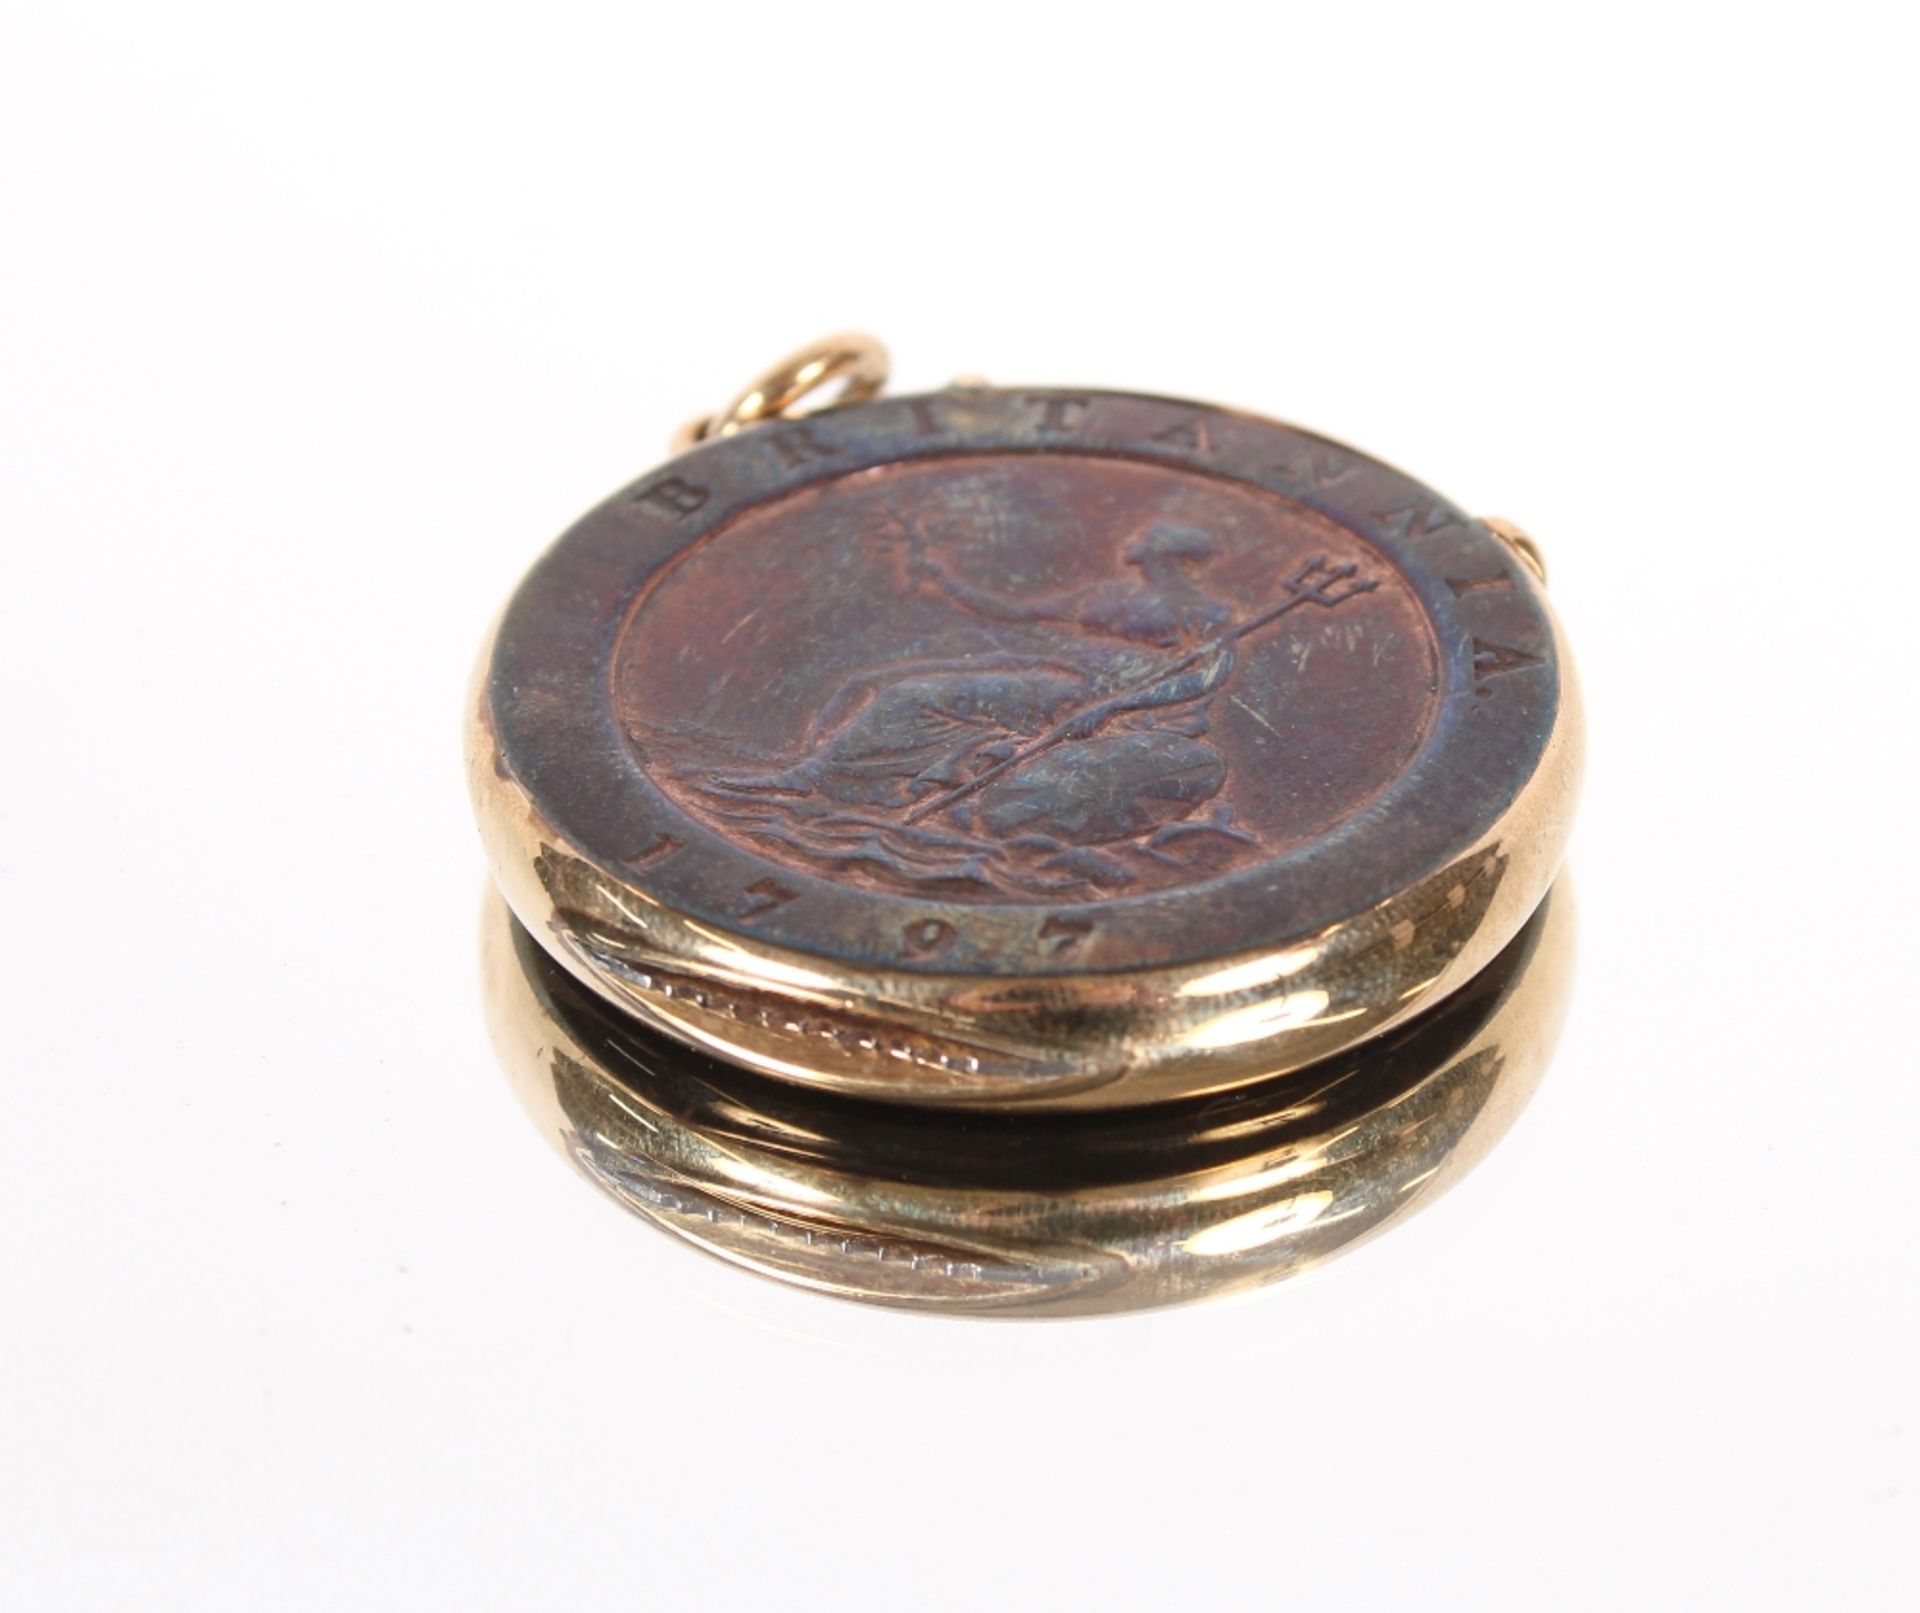 A circular vesta case, made from a George III cartwheel penny, mounted in gold - Image 3 of 3